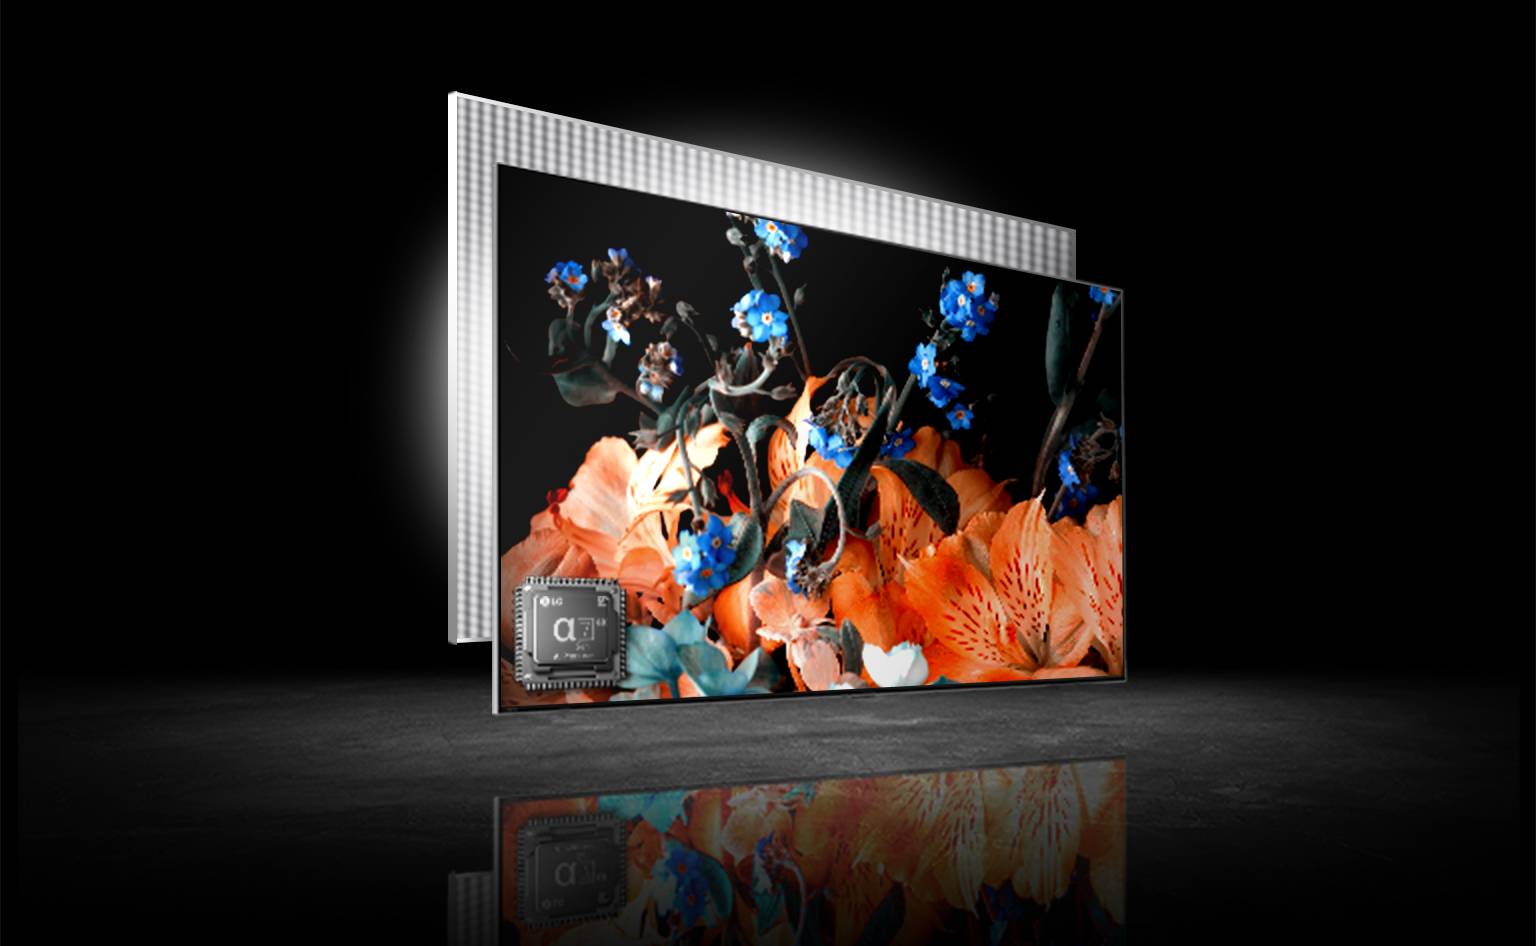 There are two TV screens – one on left another on right. There are same images of a beautiful bunch of colorful flowers on black background on both TV. An image on left is a bit pale while an image on right is very vivid. There is a processor chip image on left bottom corner of a TV on right image.